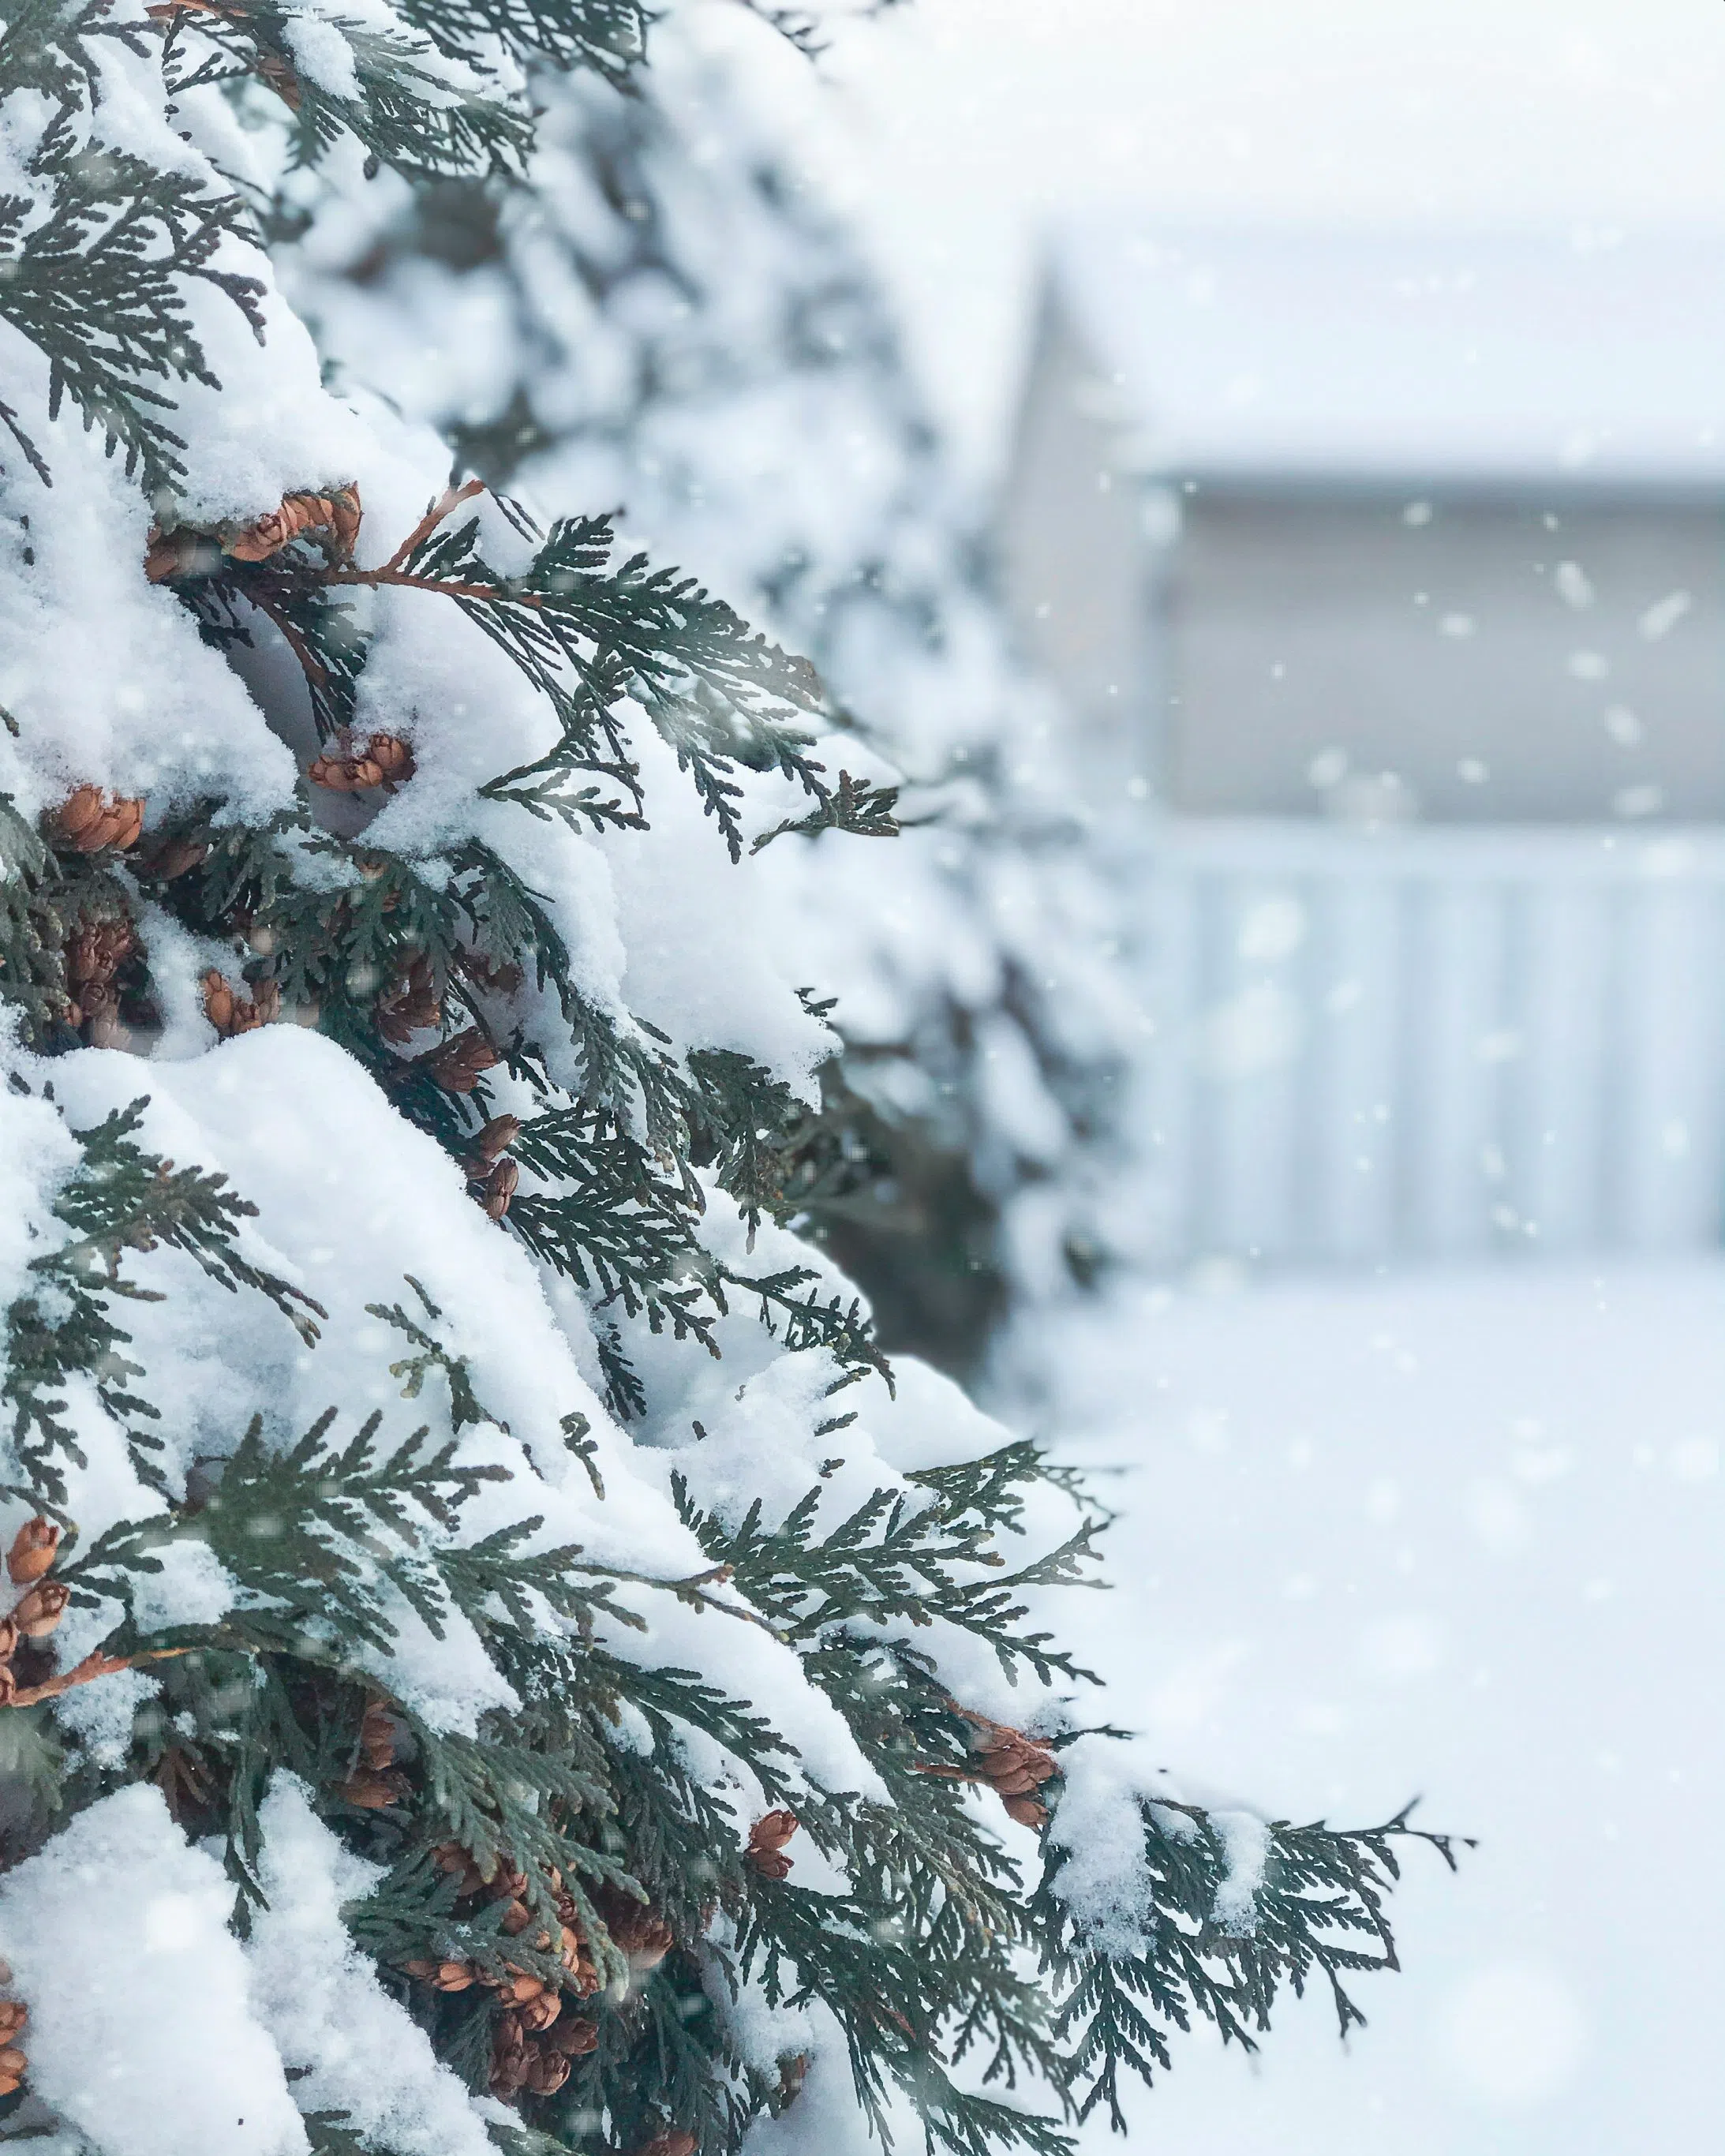 Dreaming Of A White Christmas? Here's What The Old Farmer's Almanac Says About Our Area!